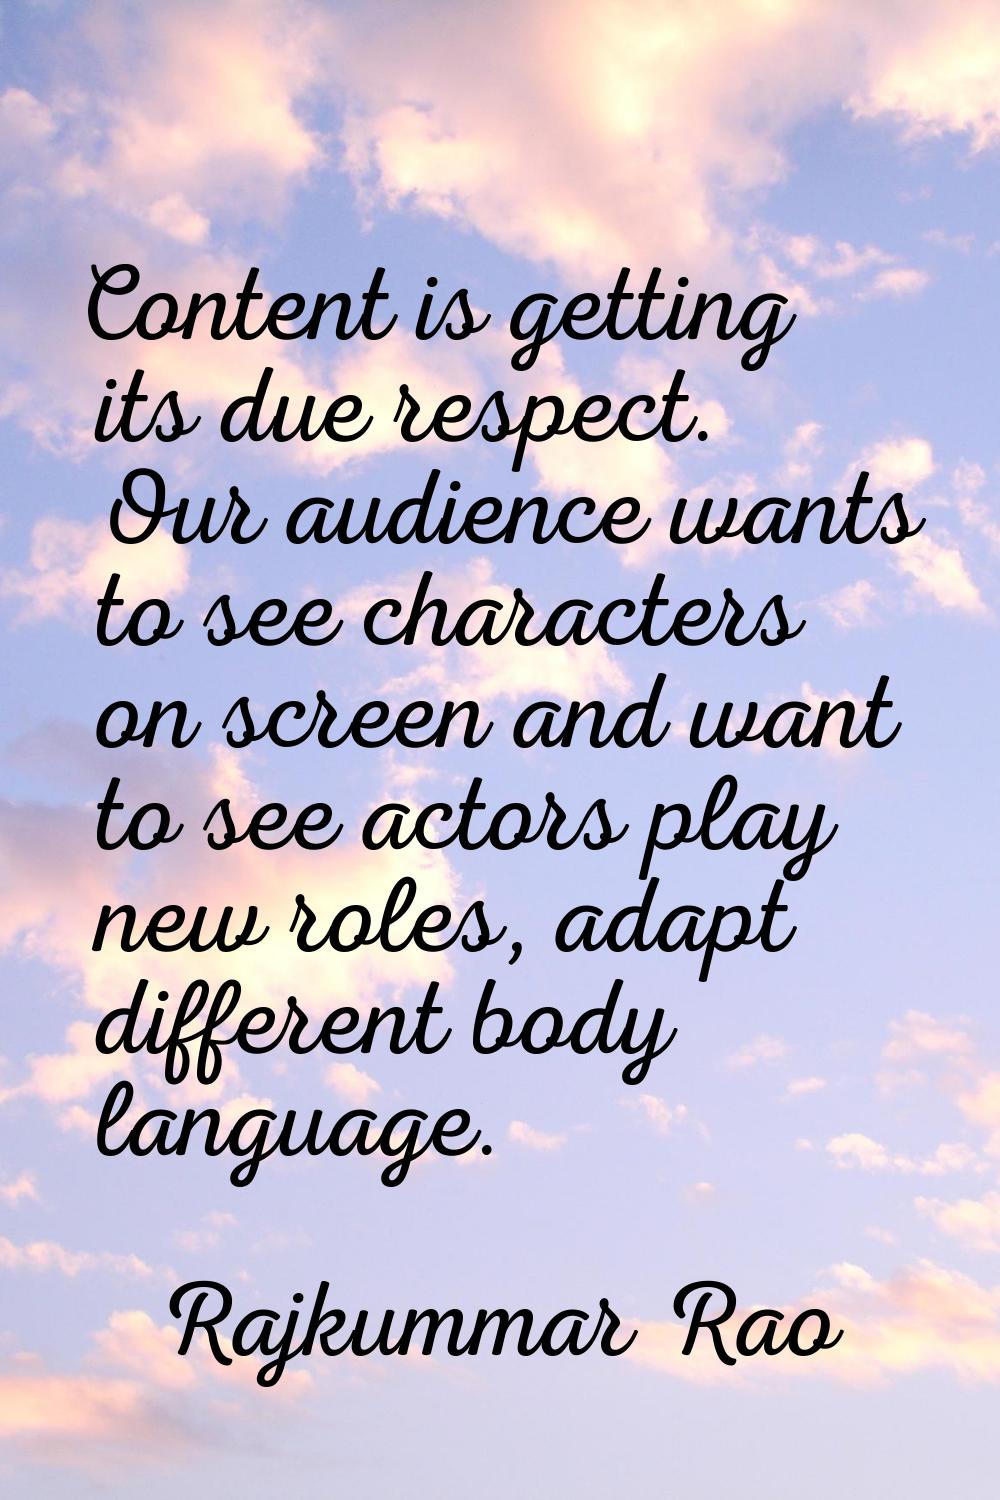 Content is getting its due respect. Our audience wants to see characters on screen and want to see 